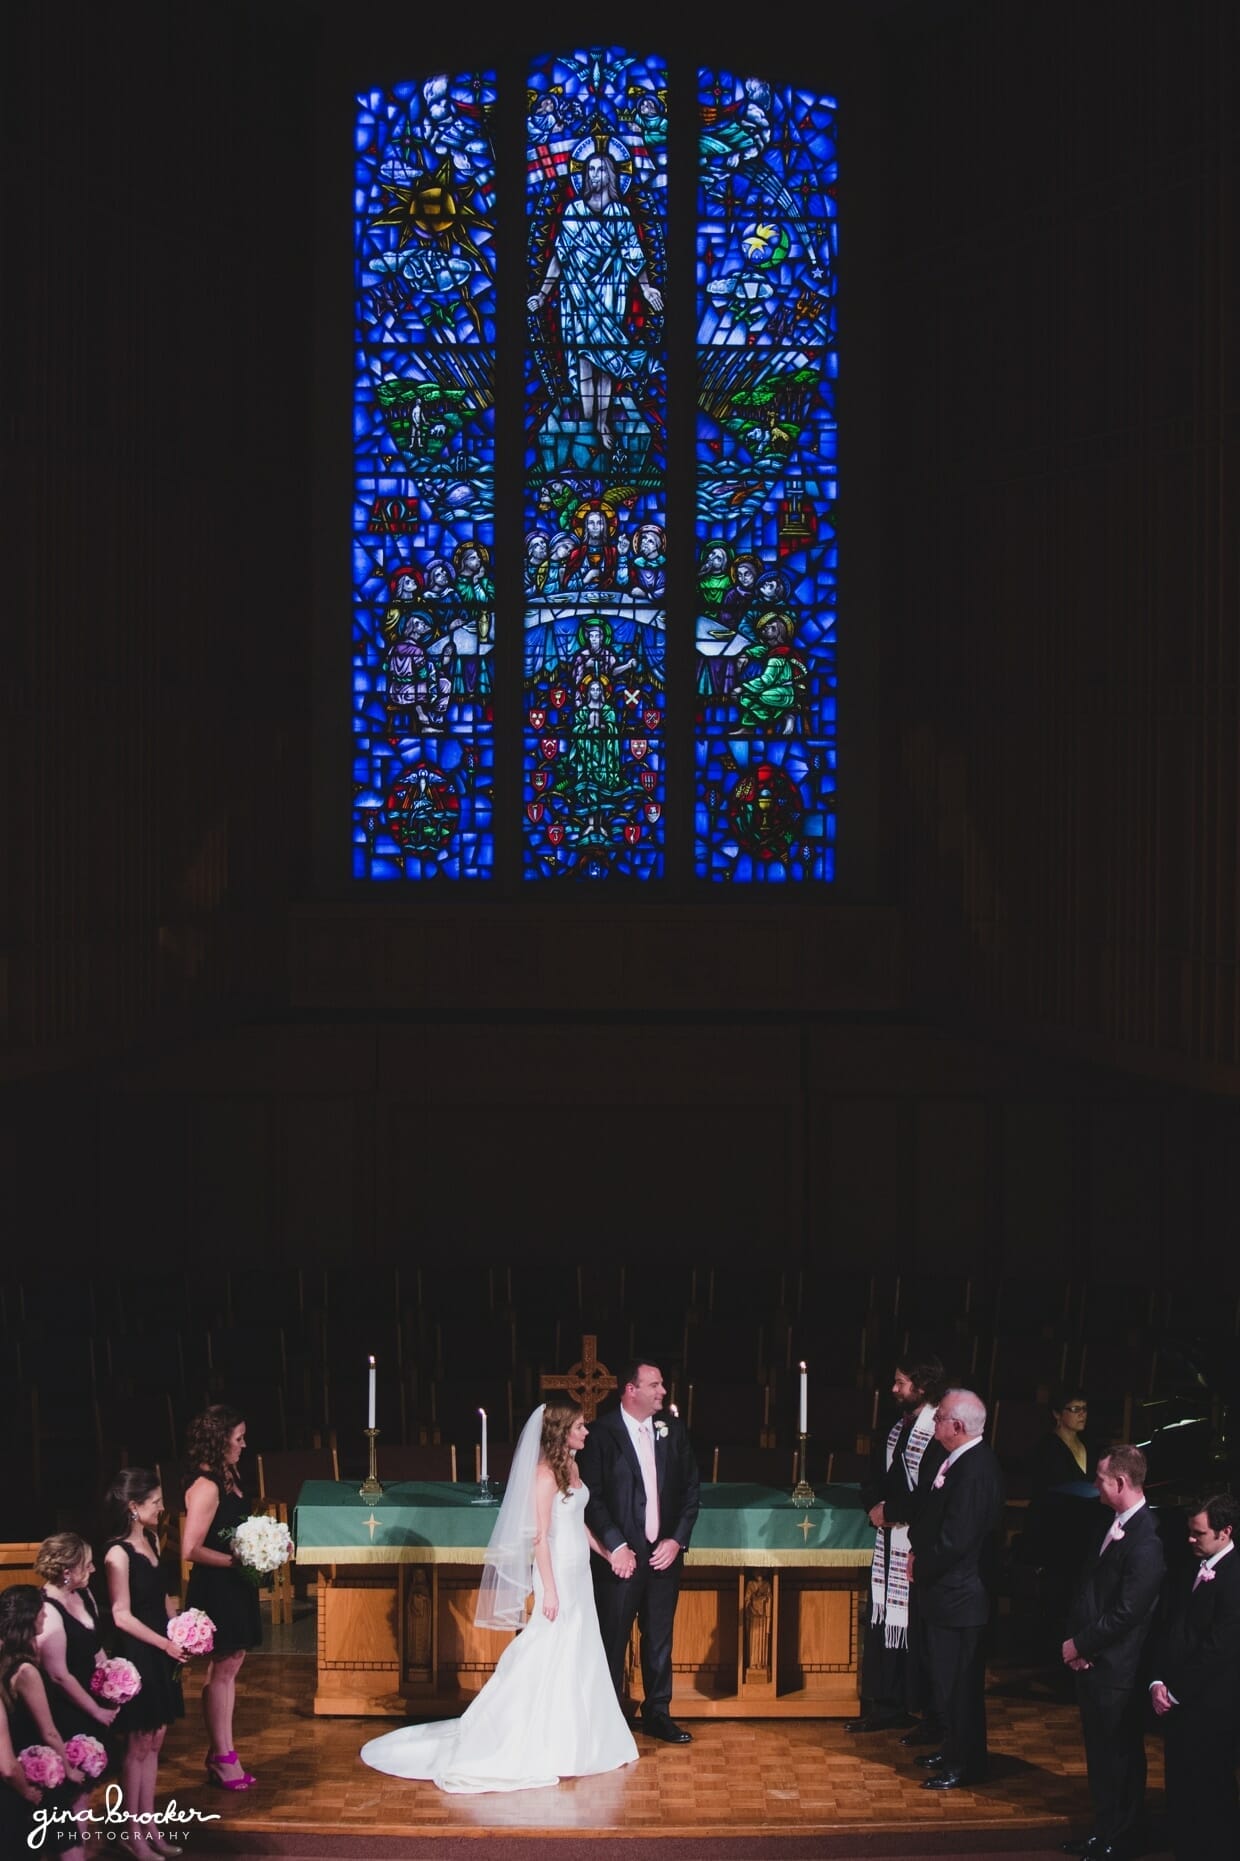 A bride and groom exchange vows during the church ceremony at their elegant and classic Boston Wedding